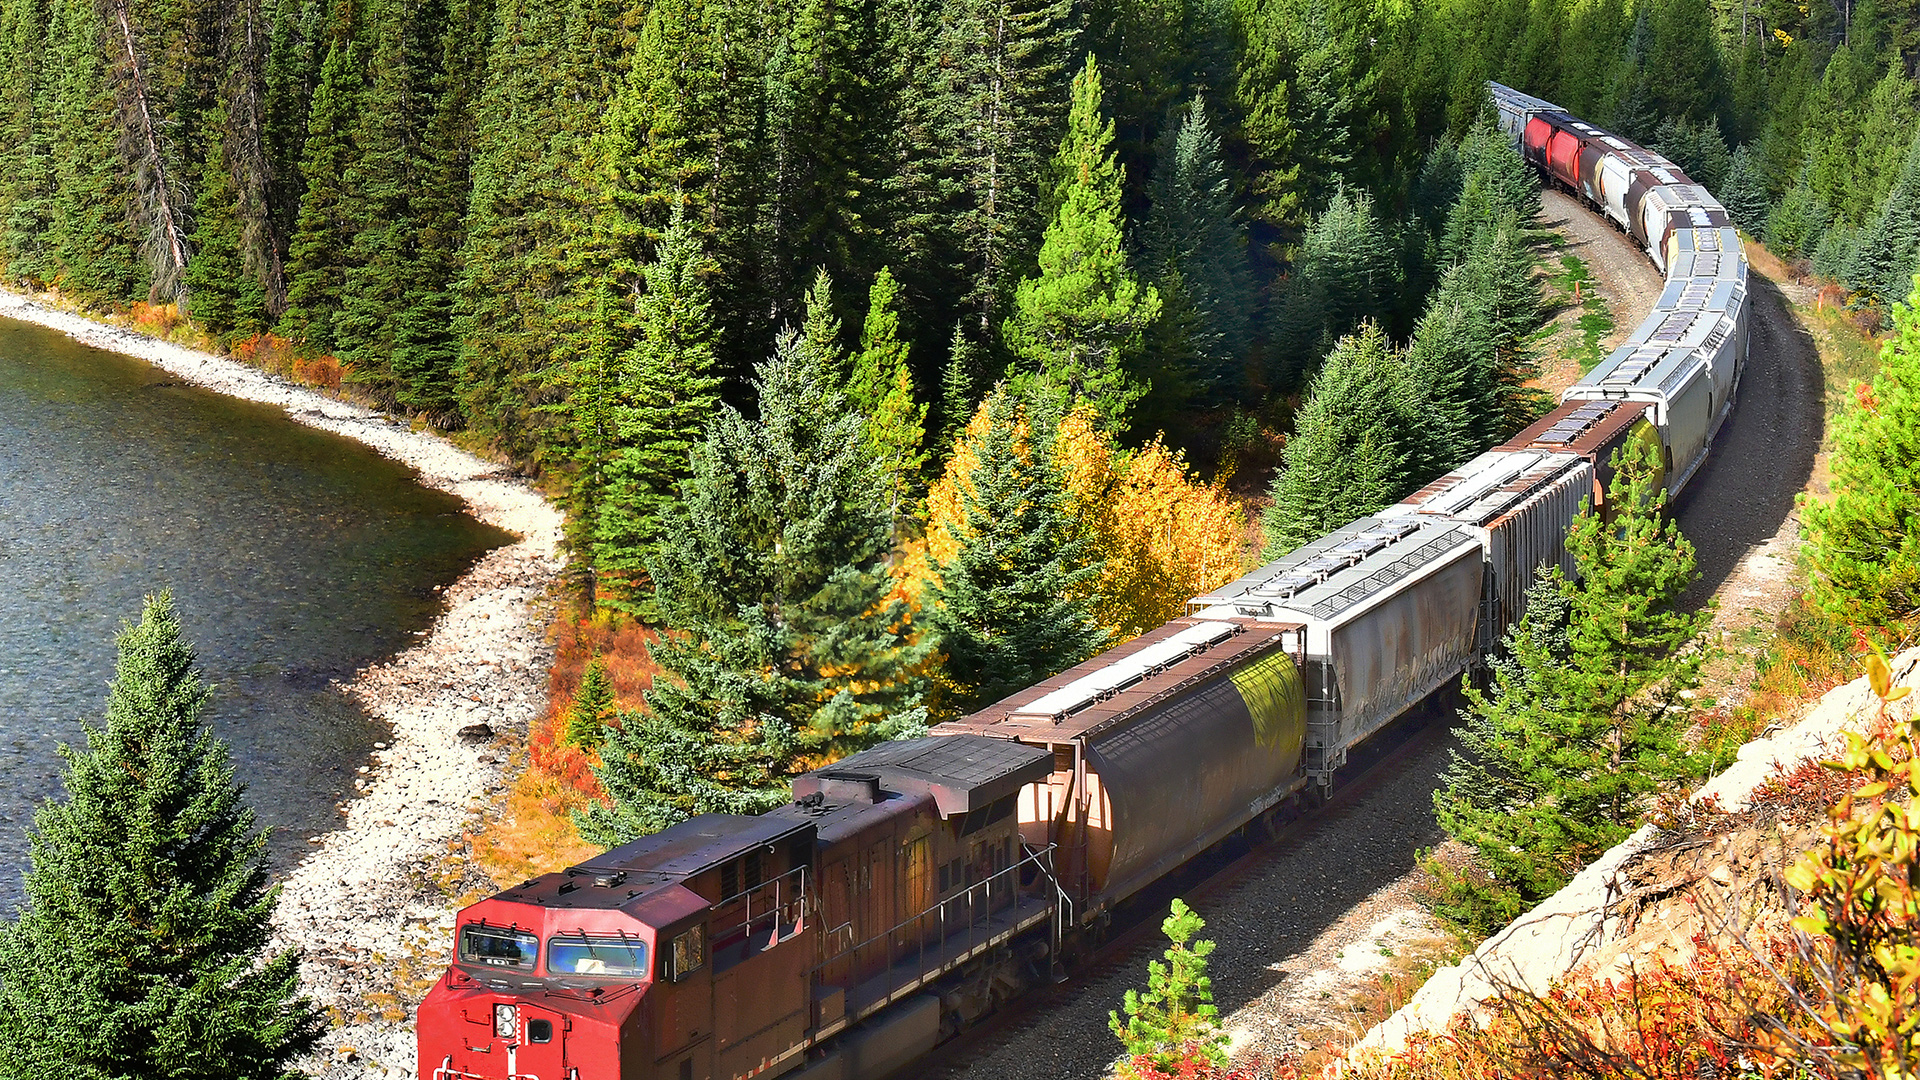 A train passing through the Canadian Rockies in Banff National Park